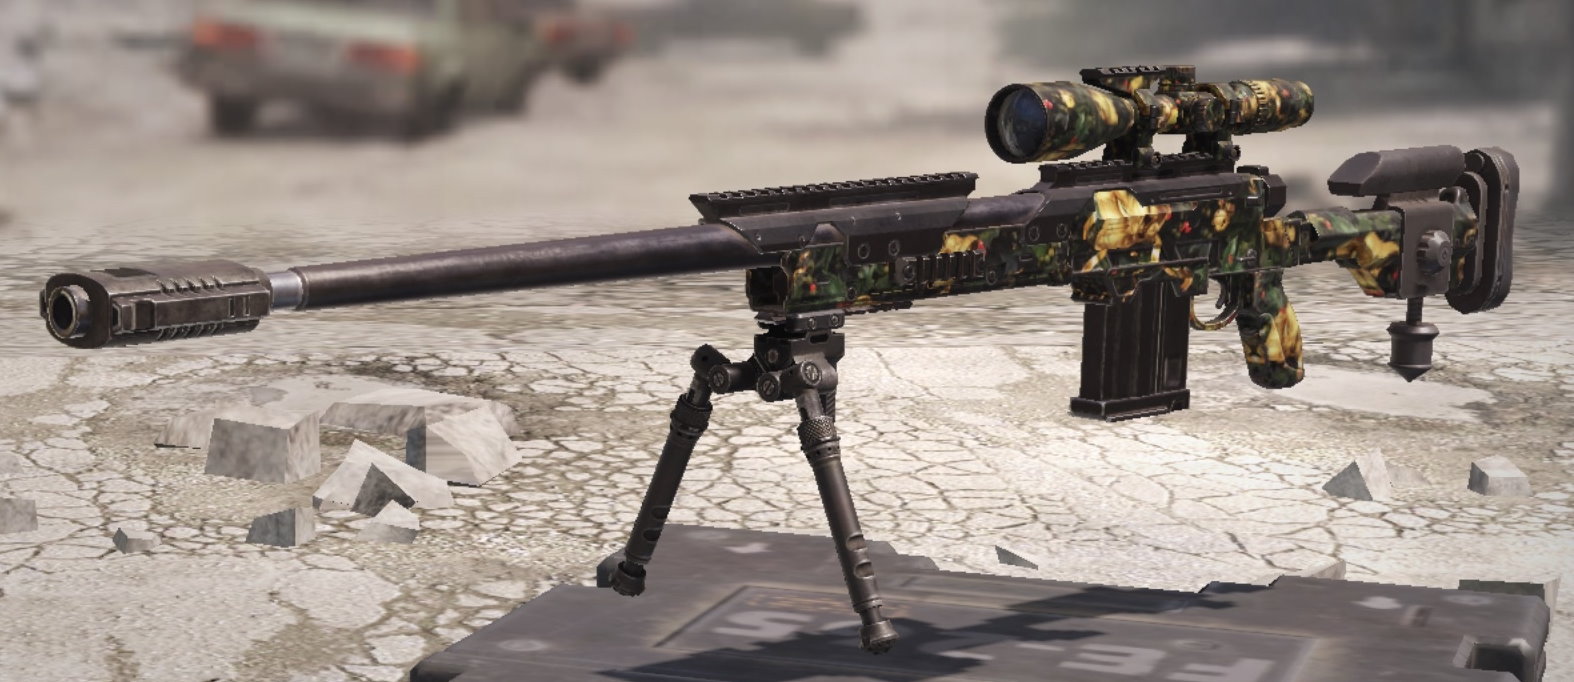 DL Q33 Jingle Bells, Uncommon camo in Call of Duty Mobile